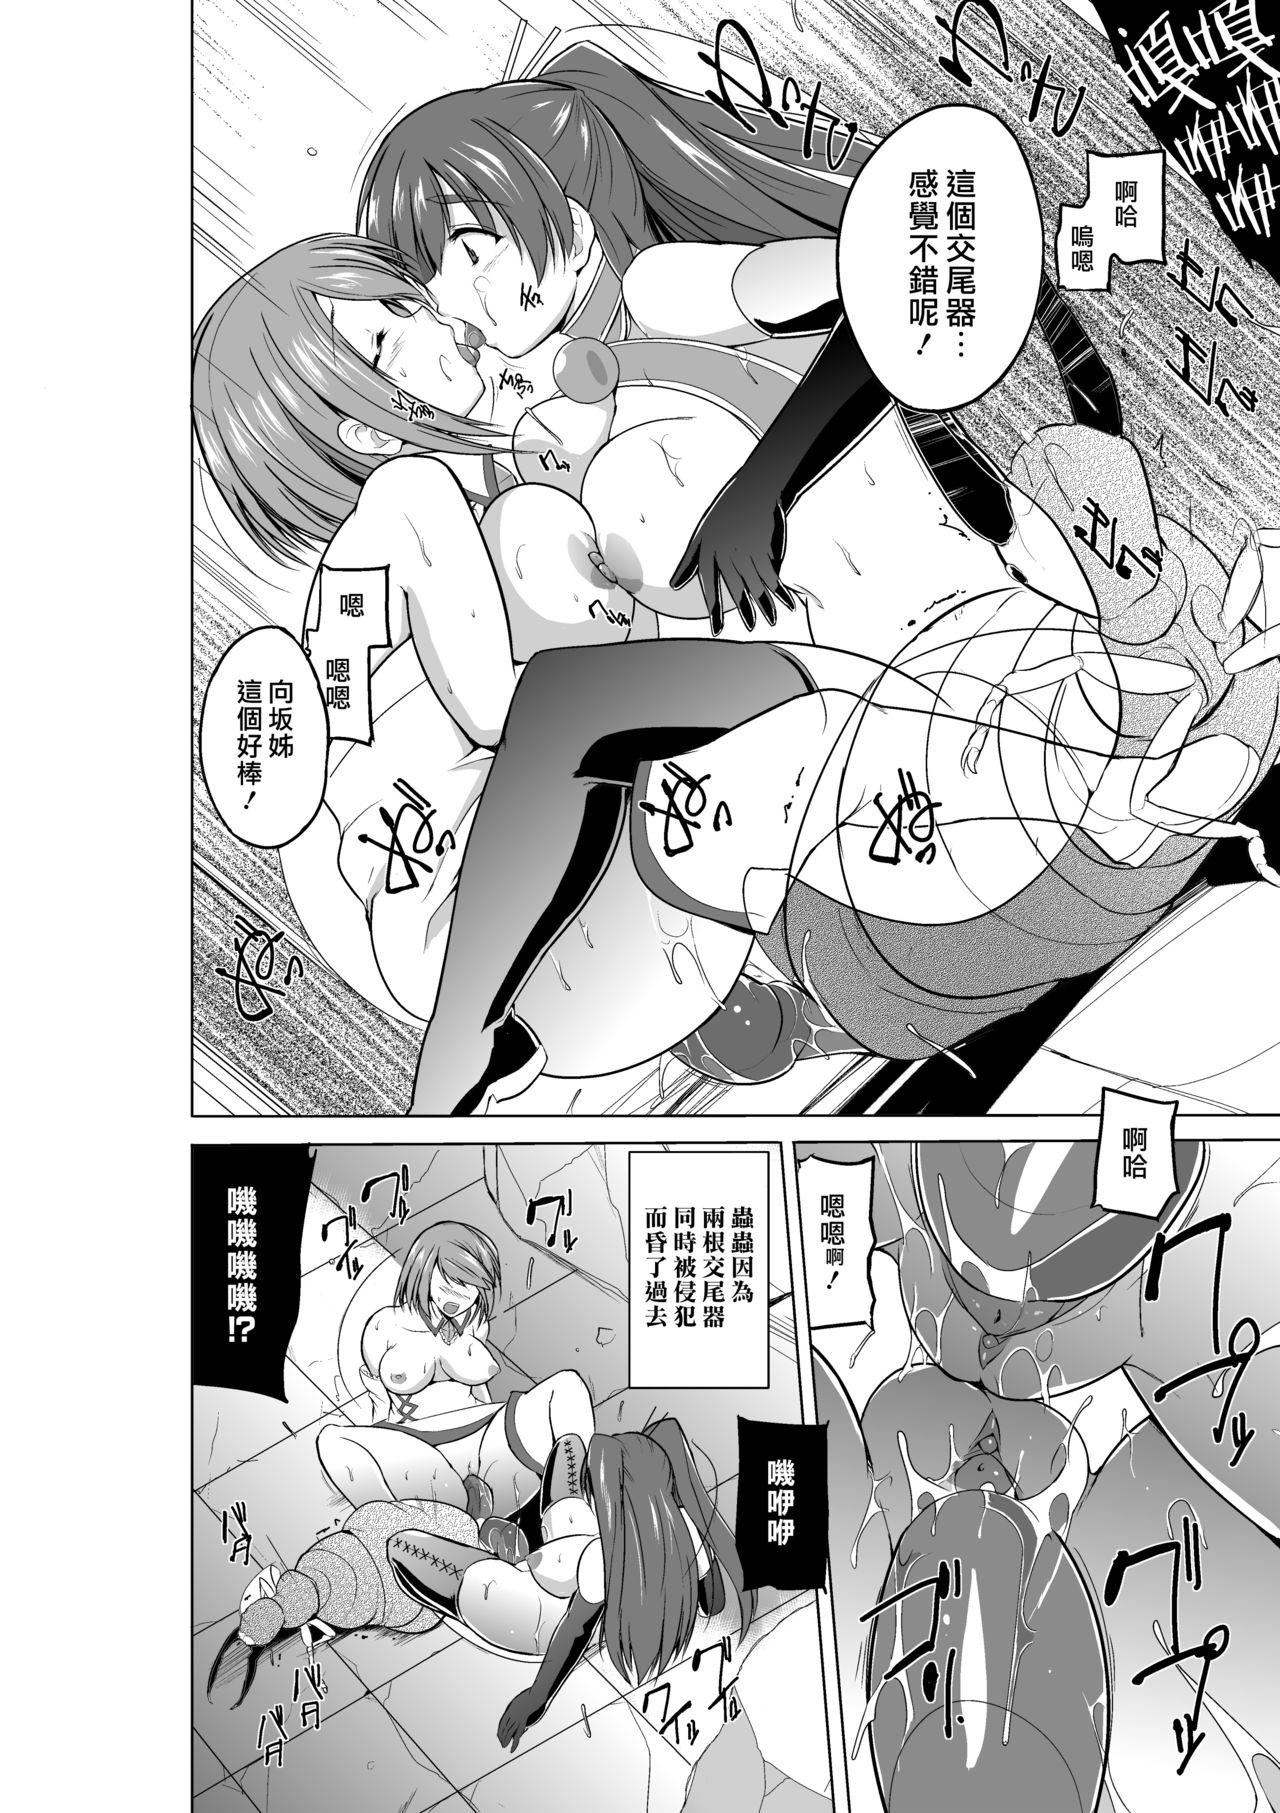 Pierced Dungeon Travelers Minna no Oyuugi - Toheart2 Ride - Page 8